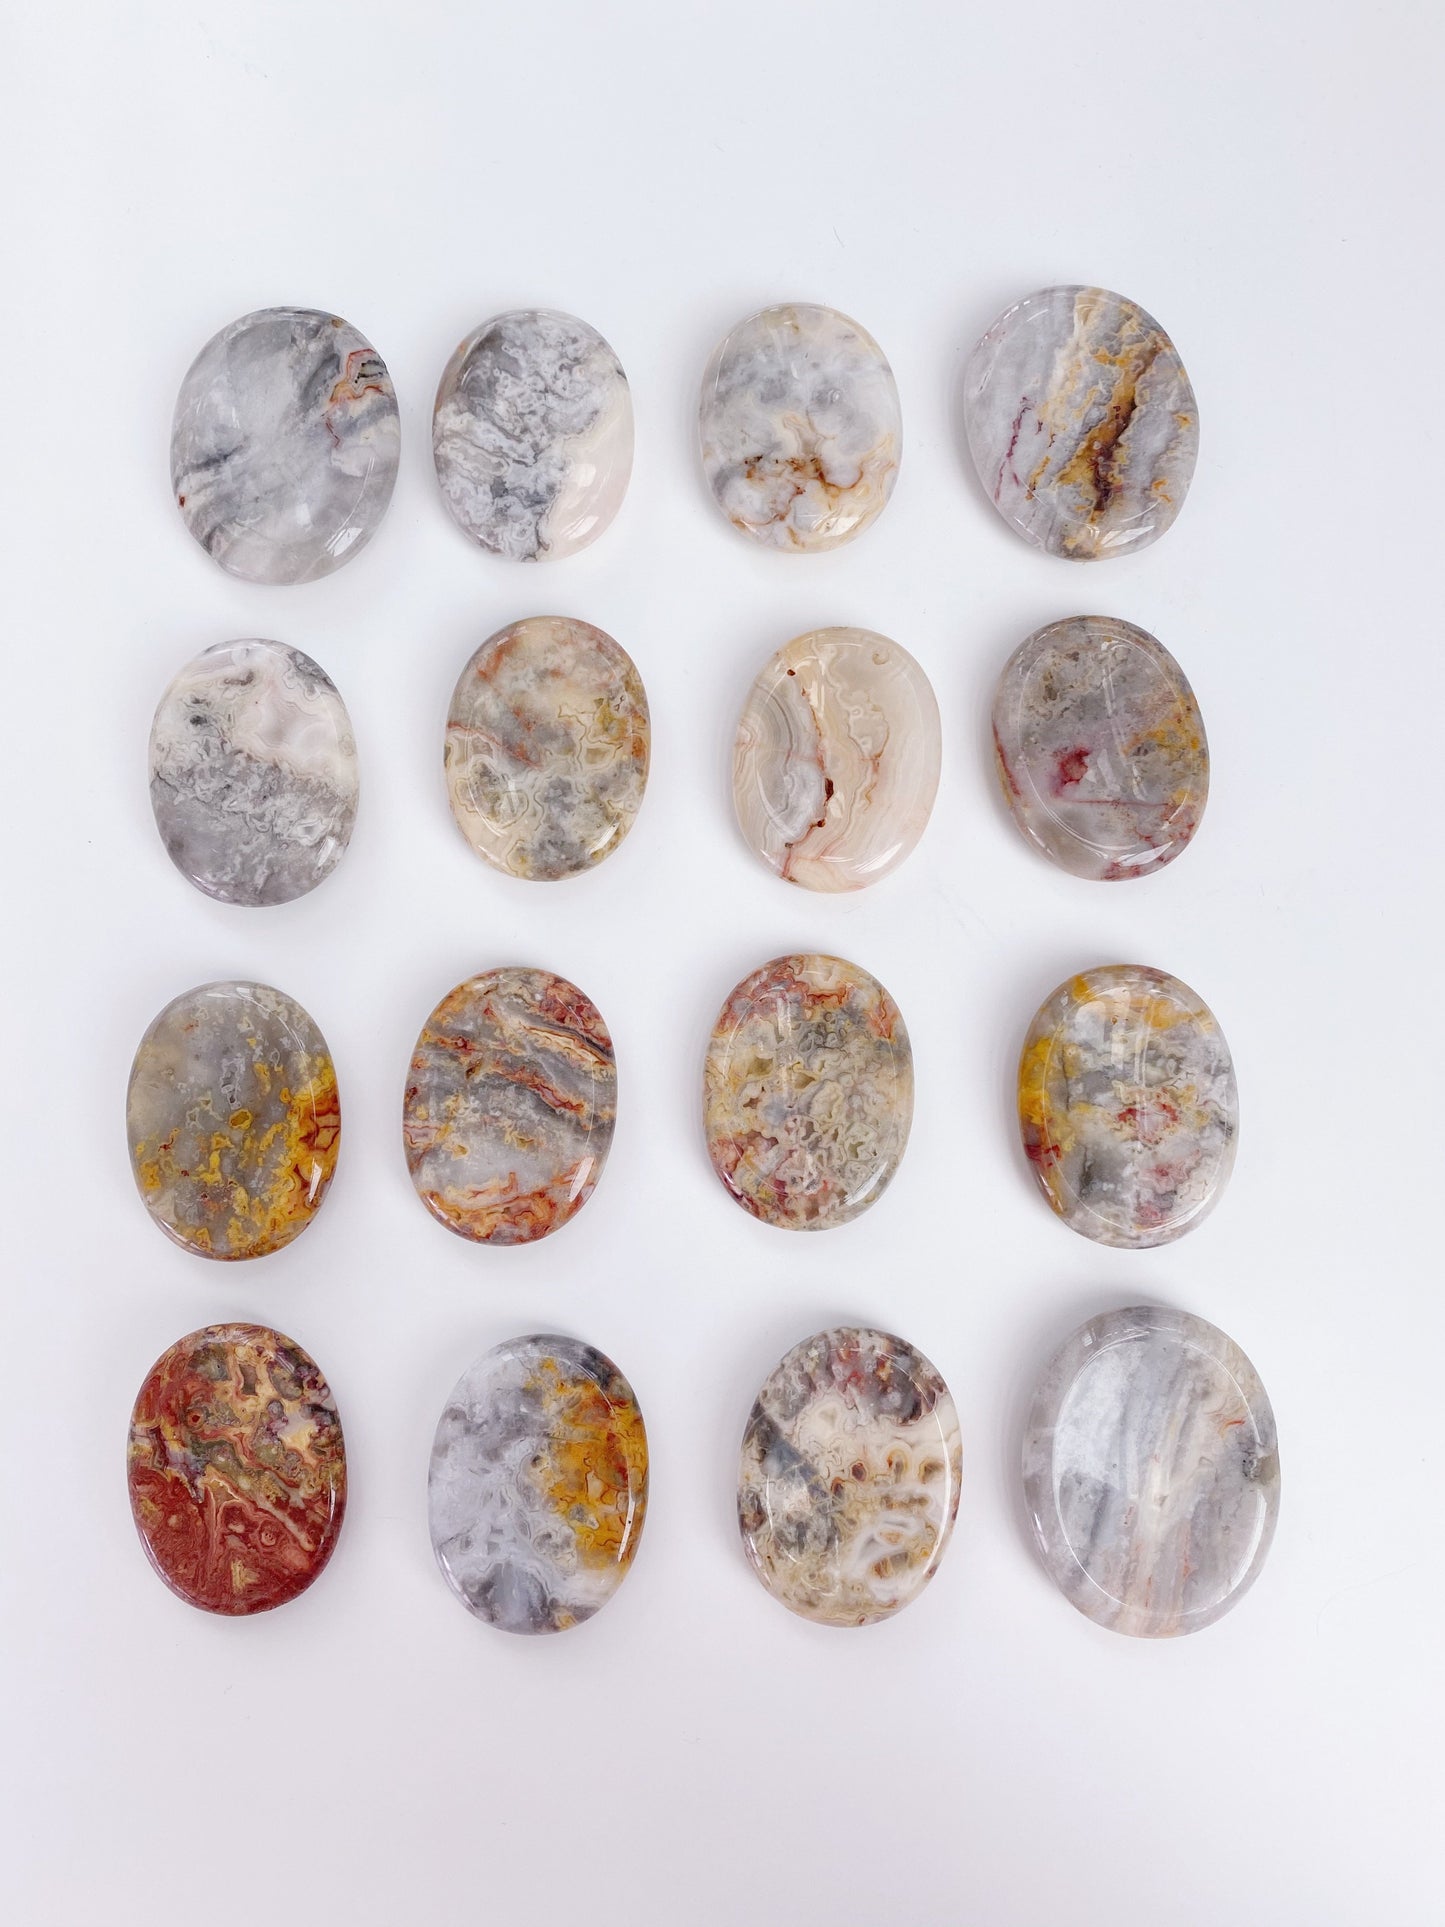 Crazy Lace Agate Worrystone - Caring Crystals